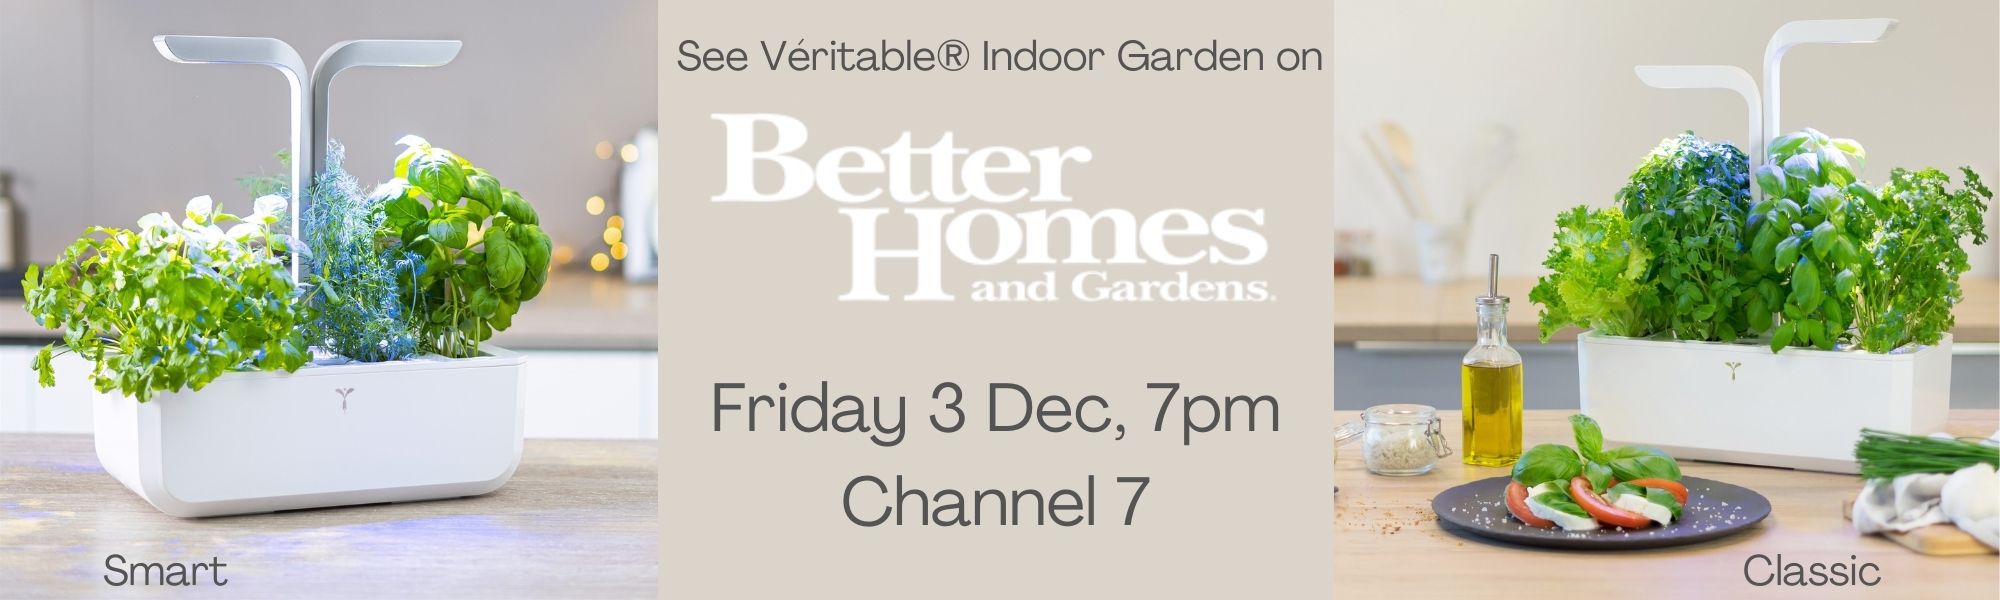 See Veritable Indoor Gardens on Better Homes and Gardens